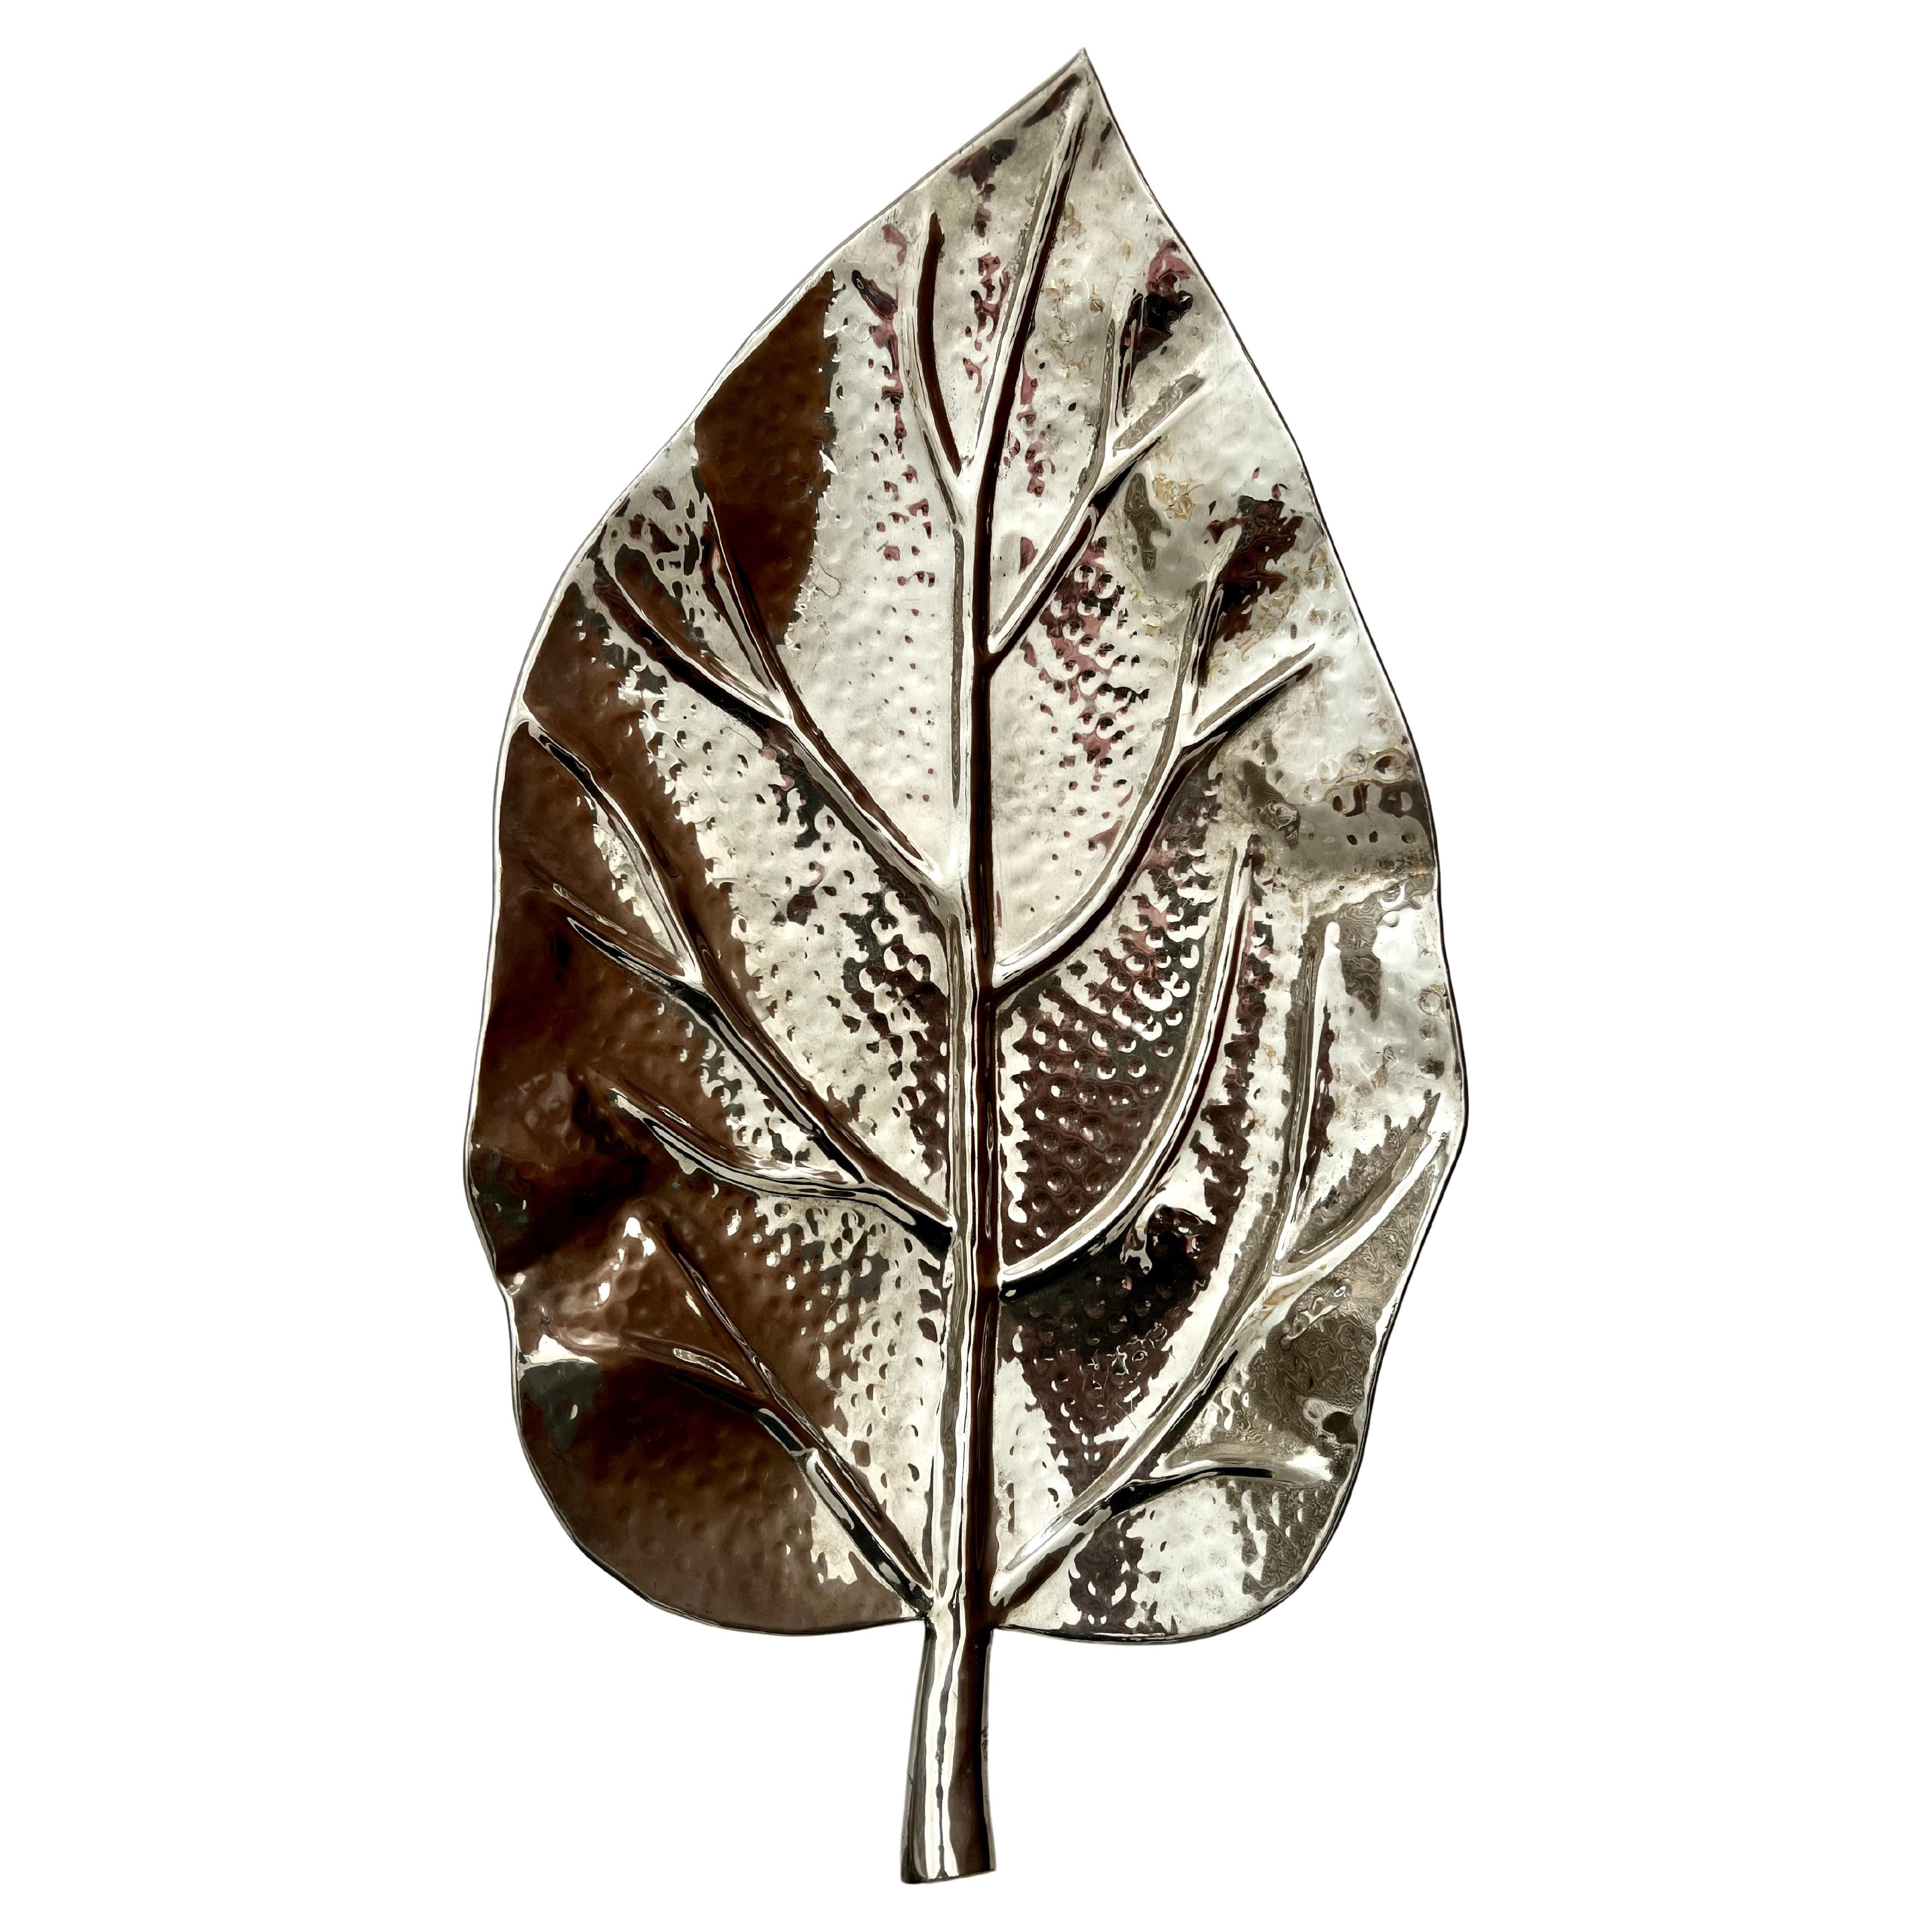 Hammered Silverplate Leaf Serving or Decorative Piece